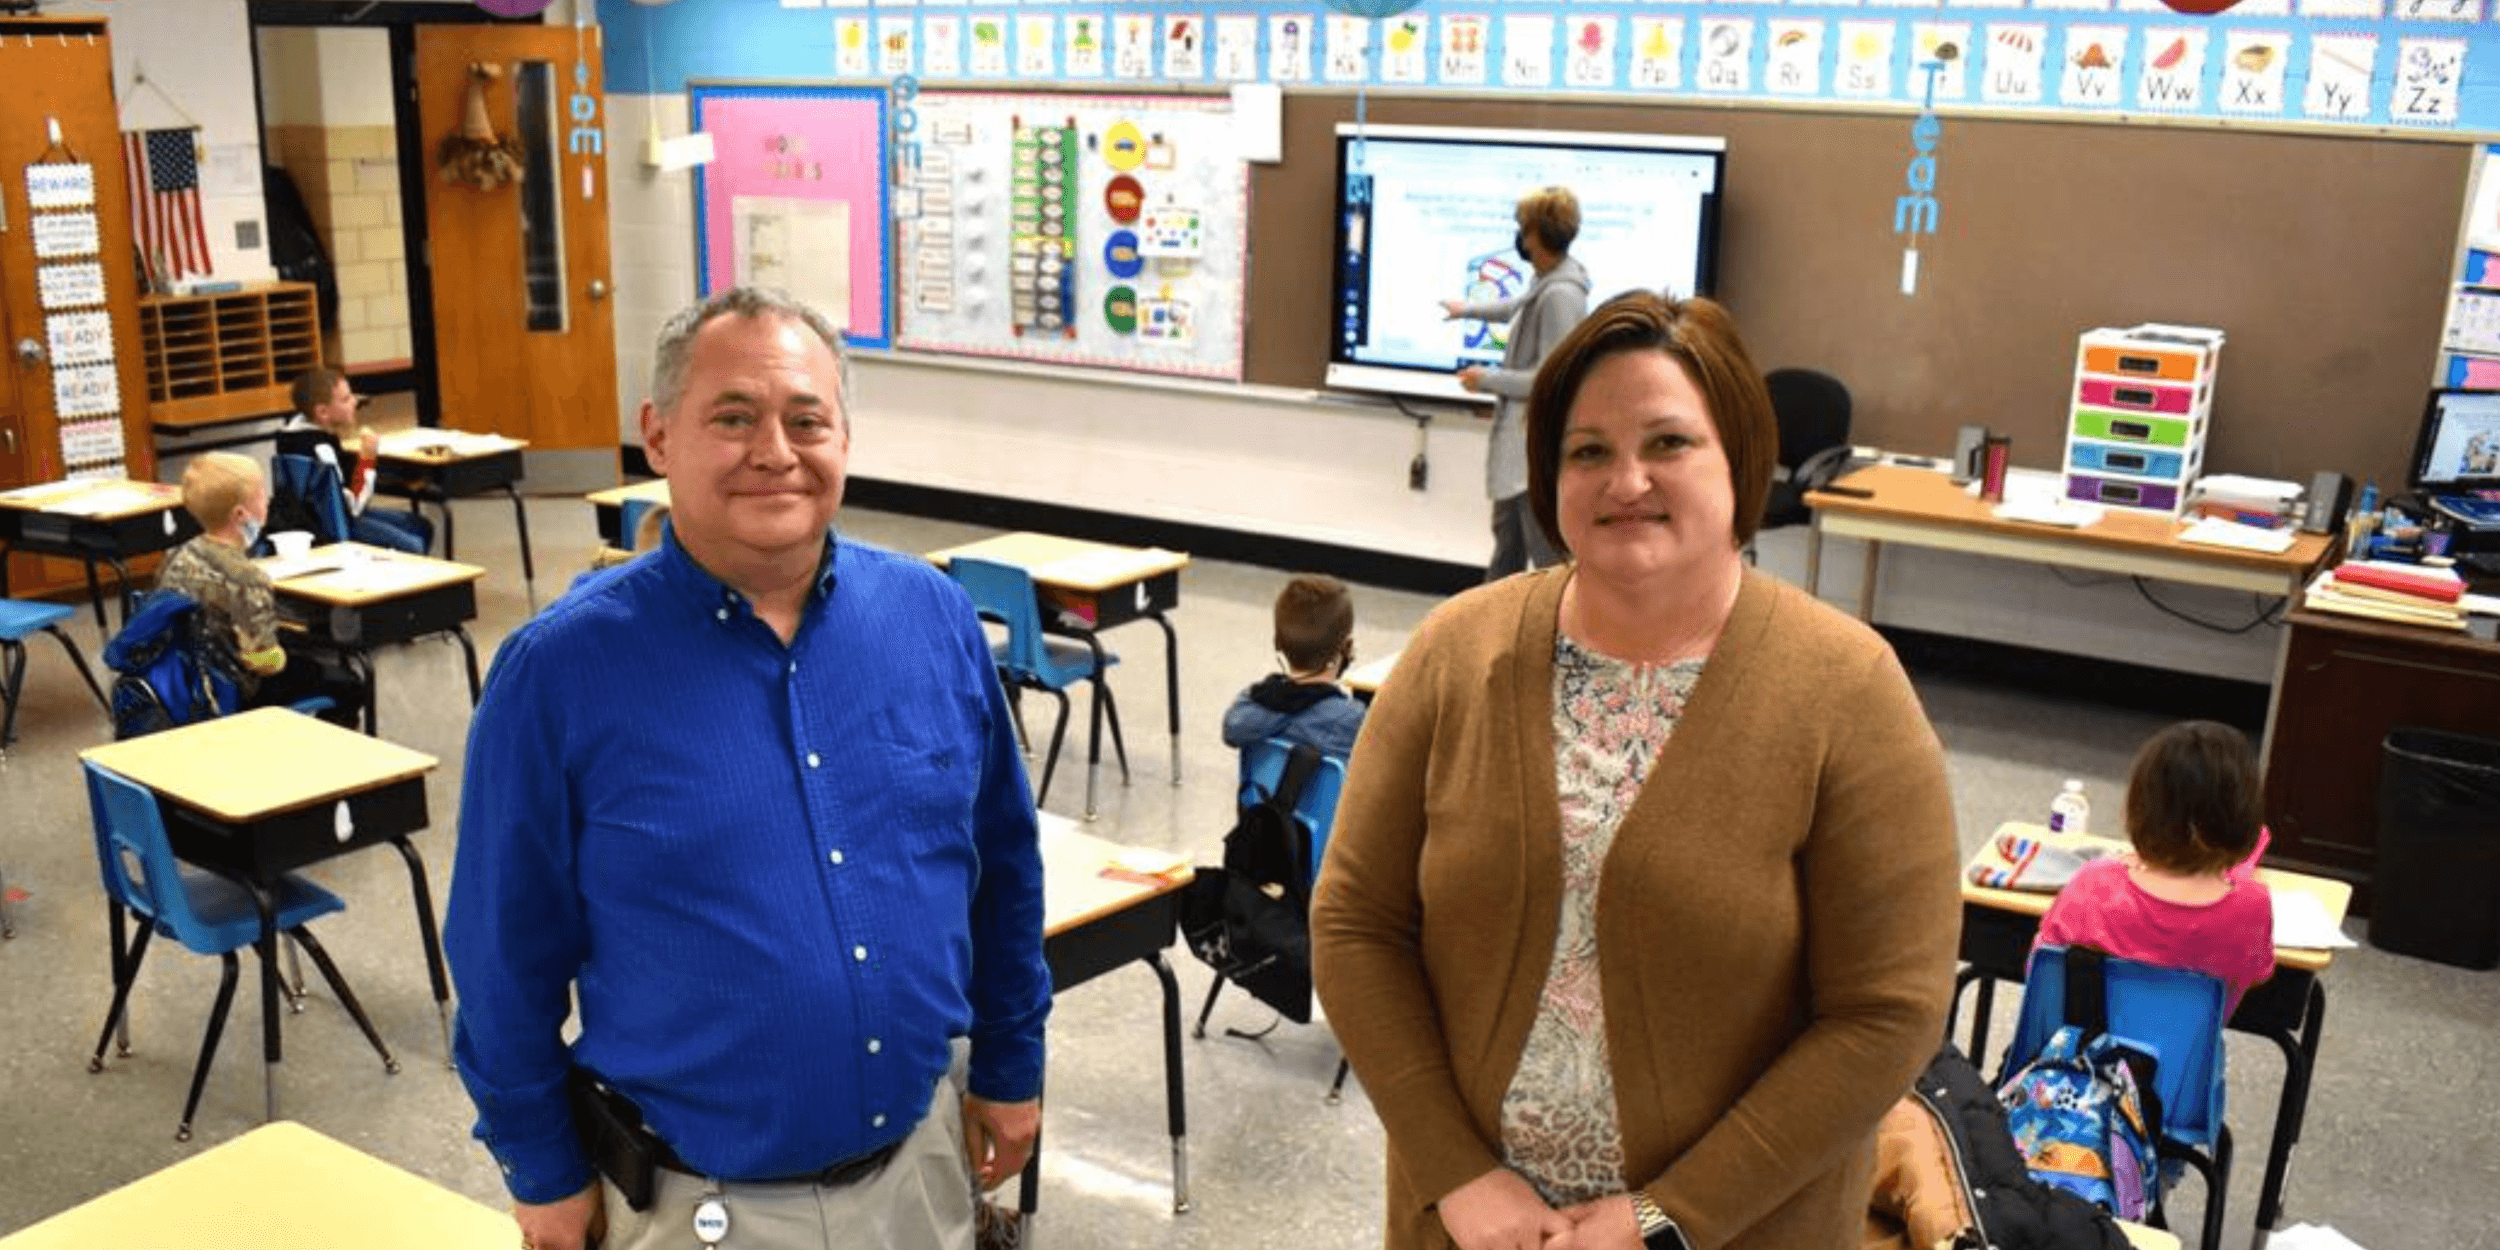 Coeburn Primary School Instructional Technology Coach Kevin Marcus and Principal Carmon Arquette in a 2nd grade classroom.